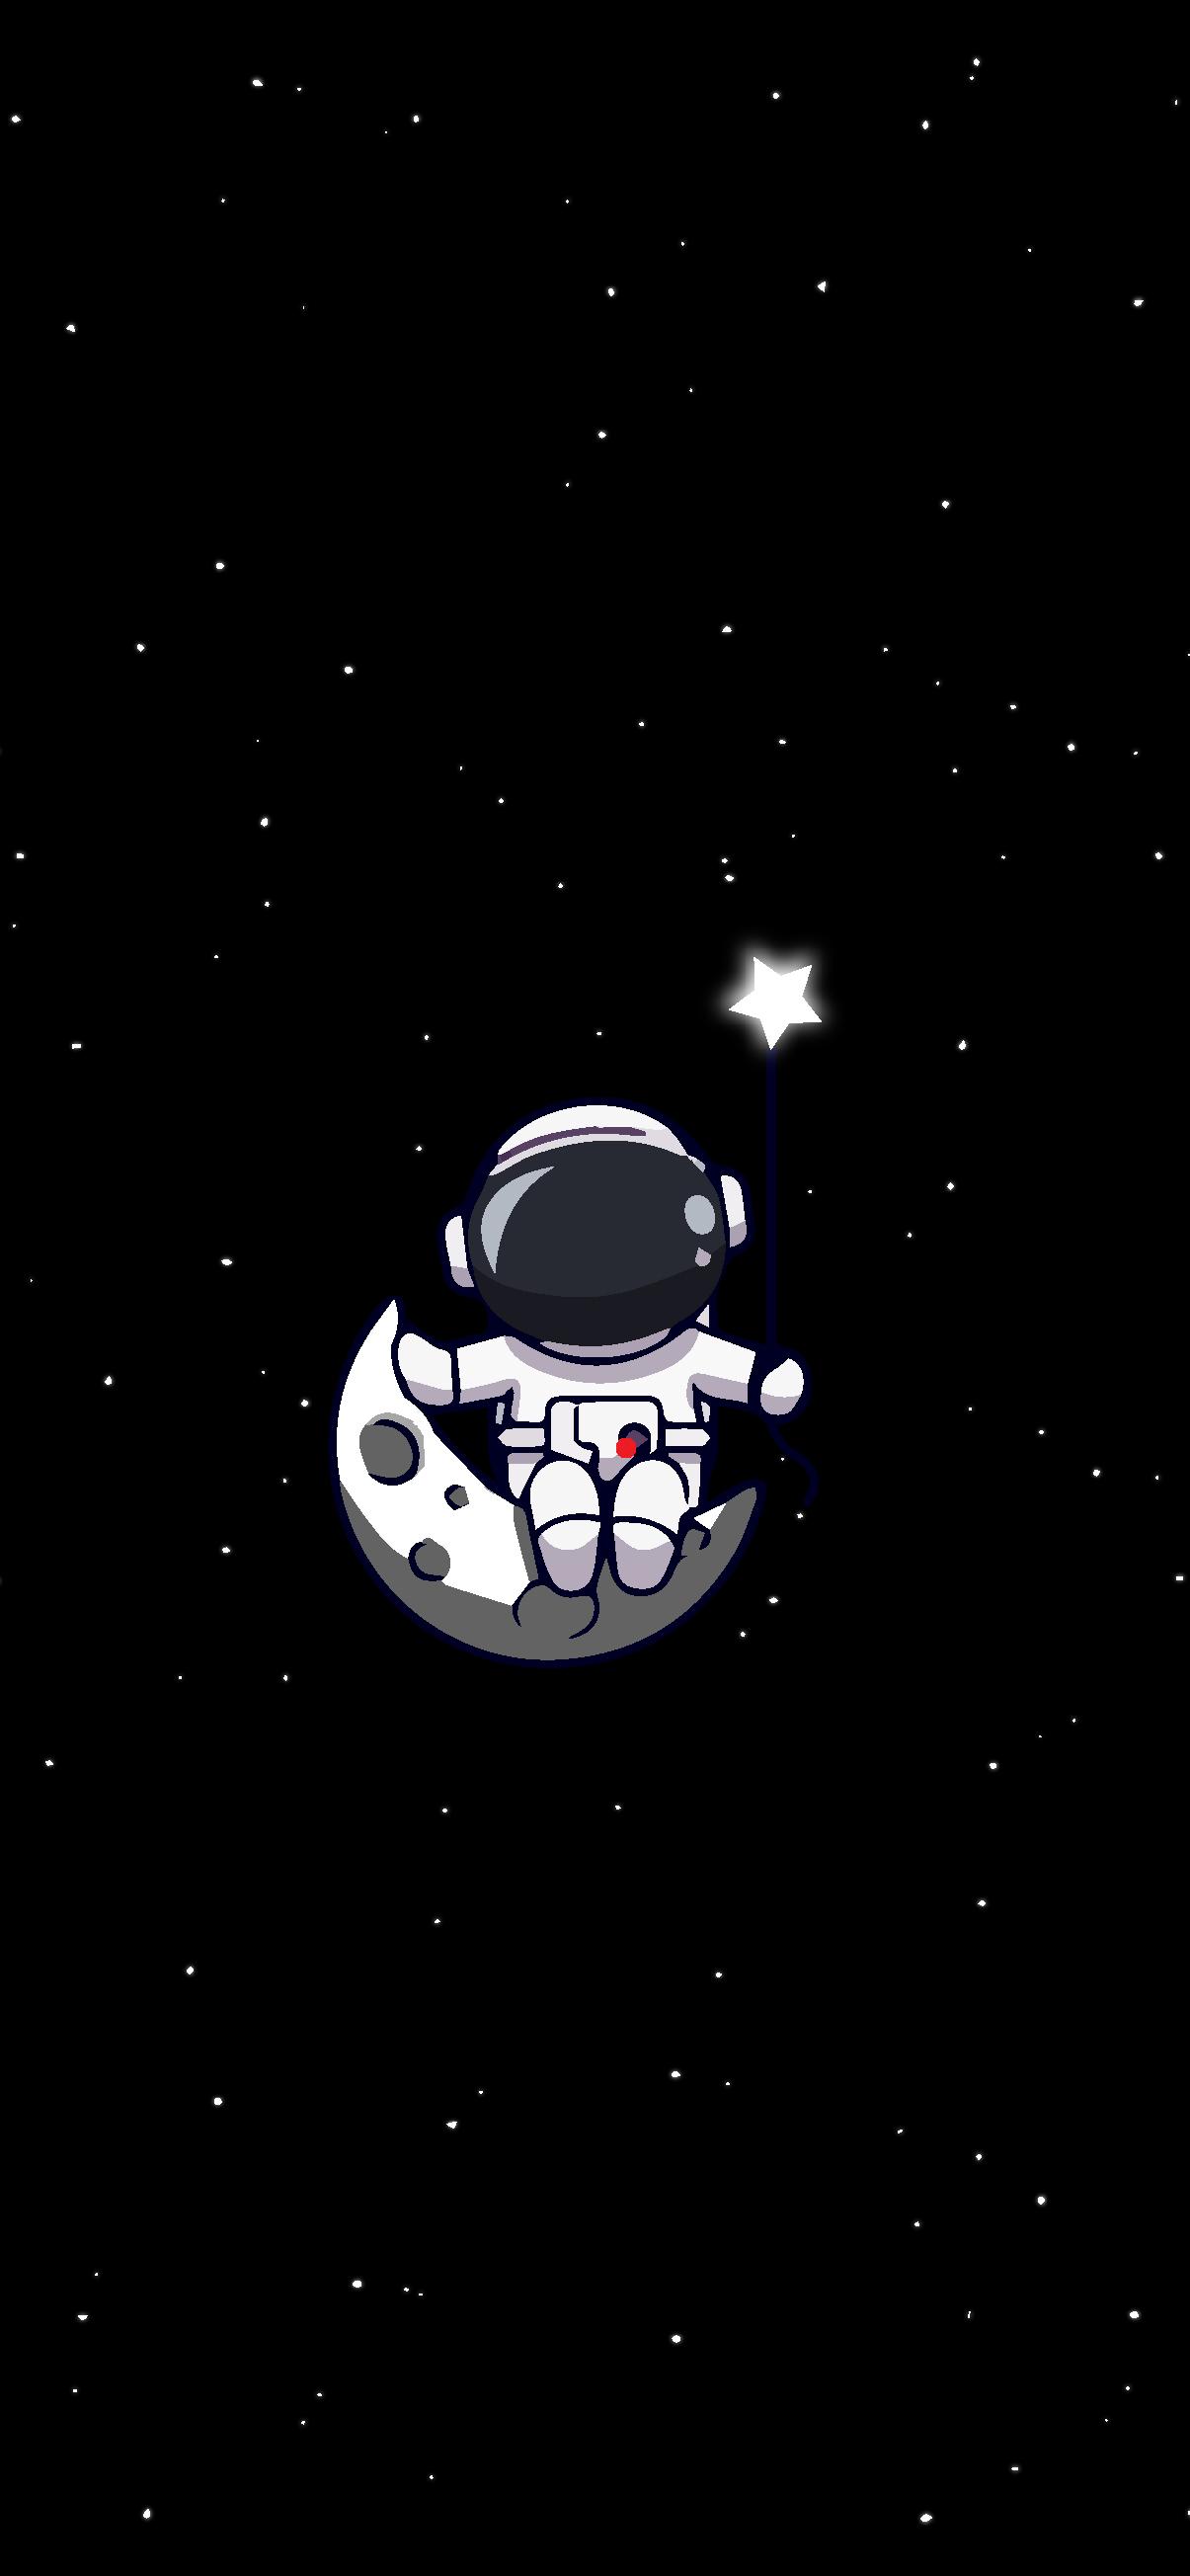 Cool phone wallpapers   Cute Astronaut